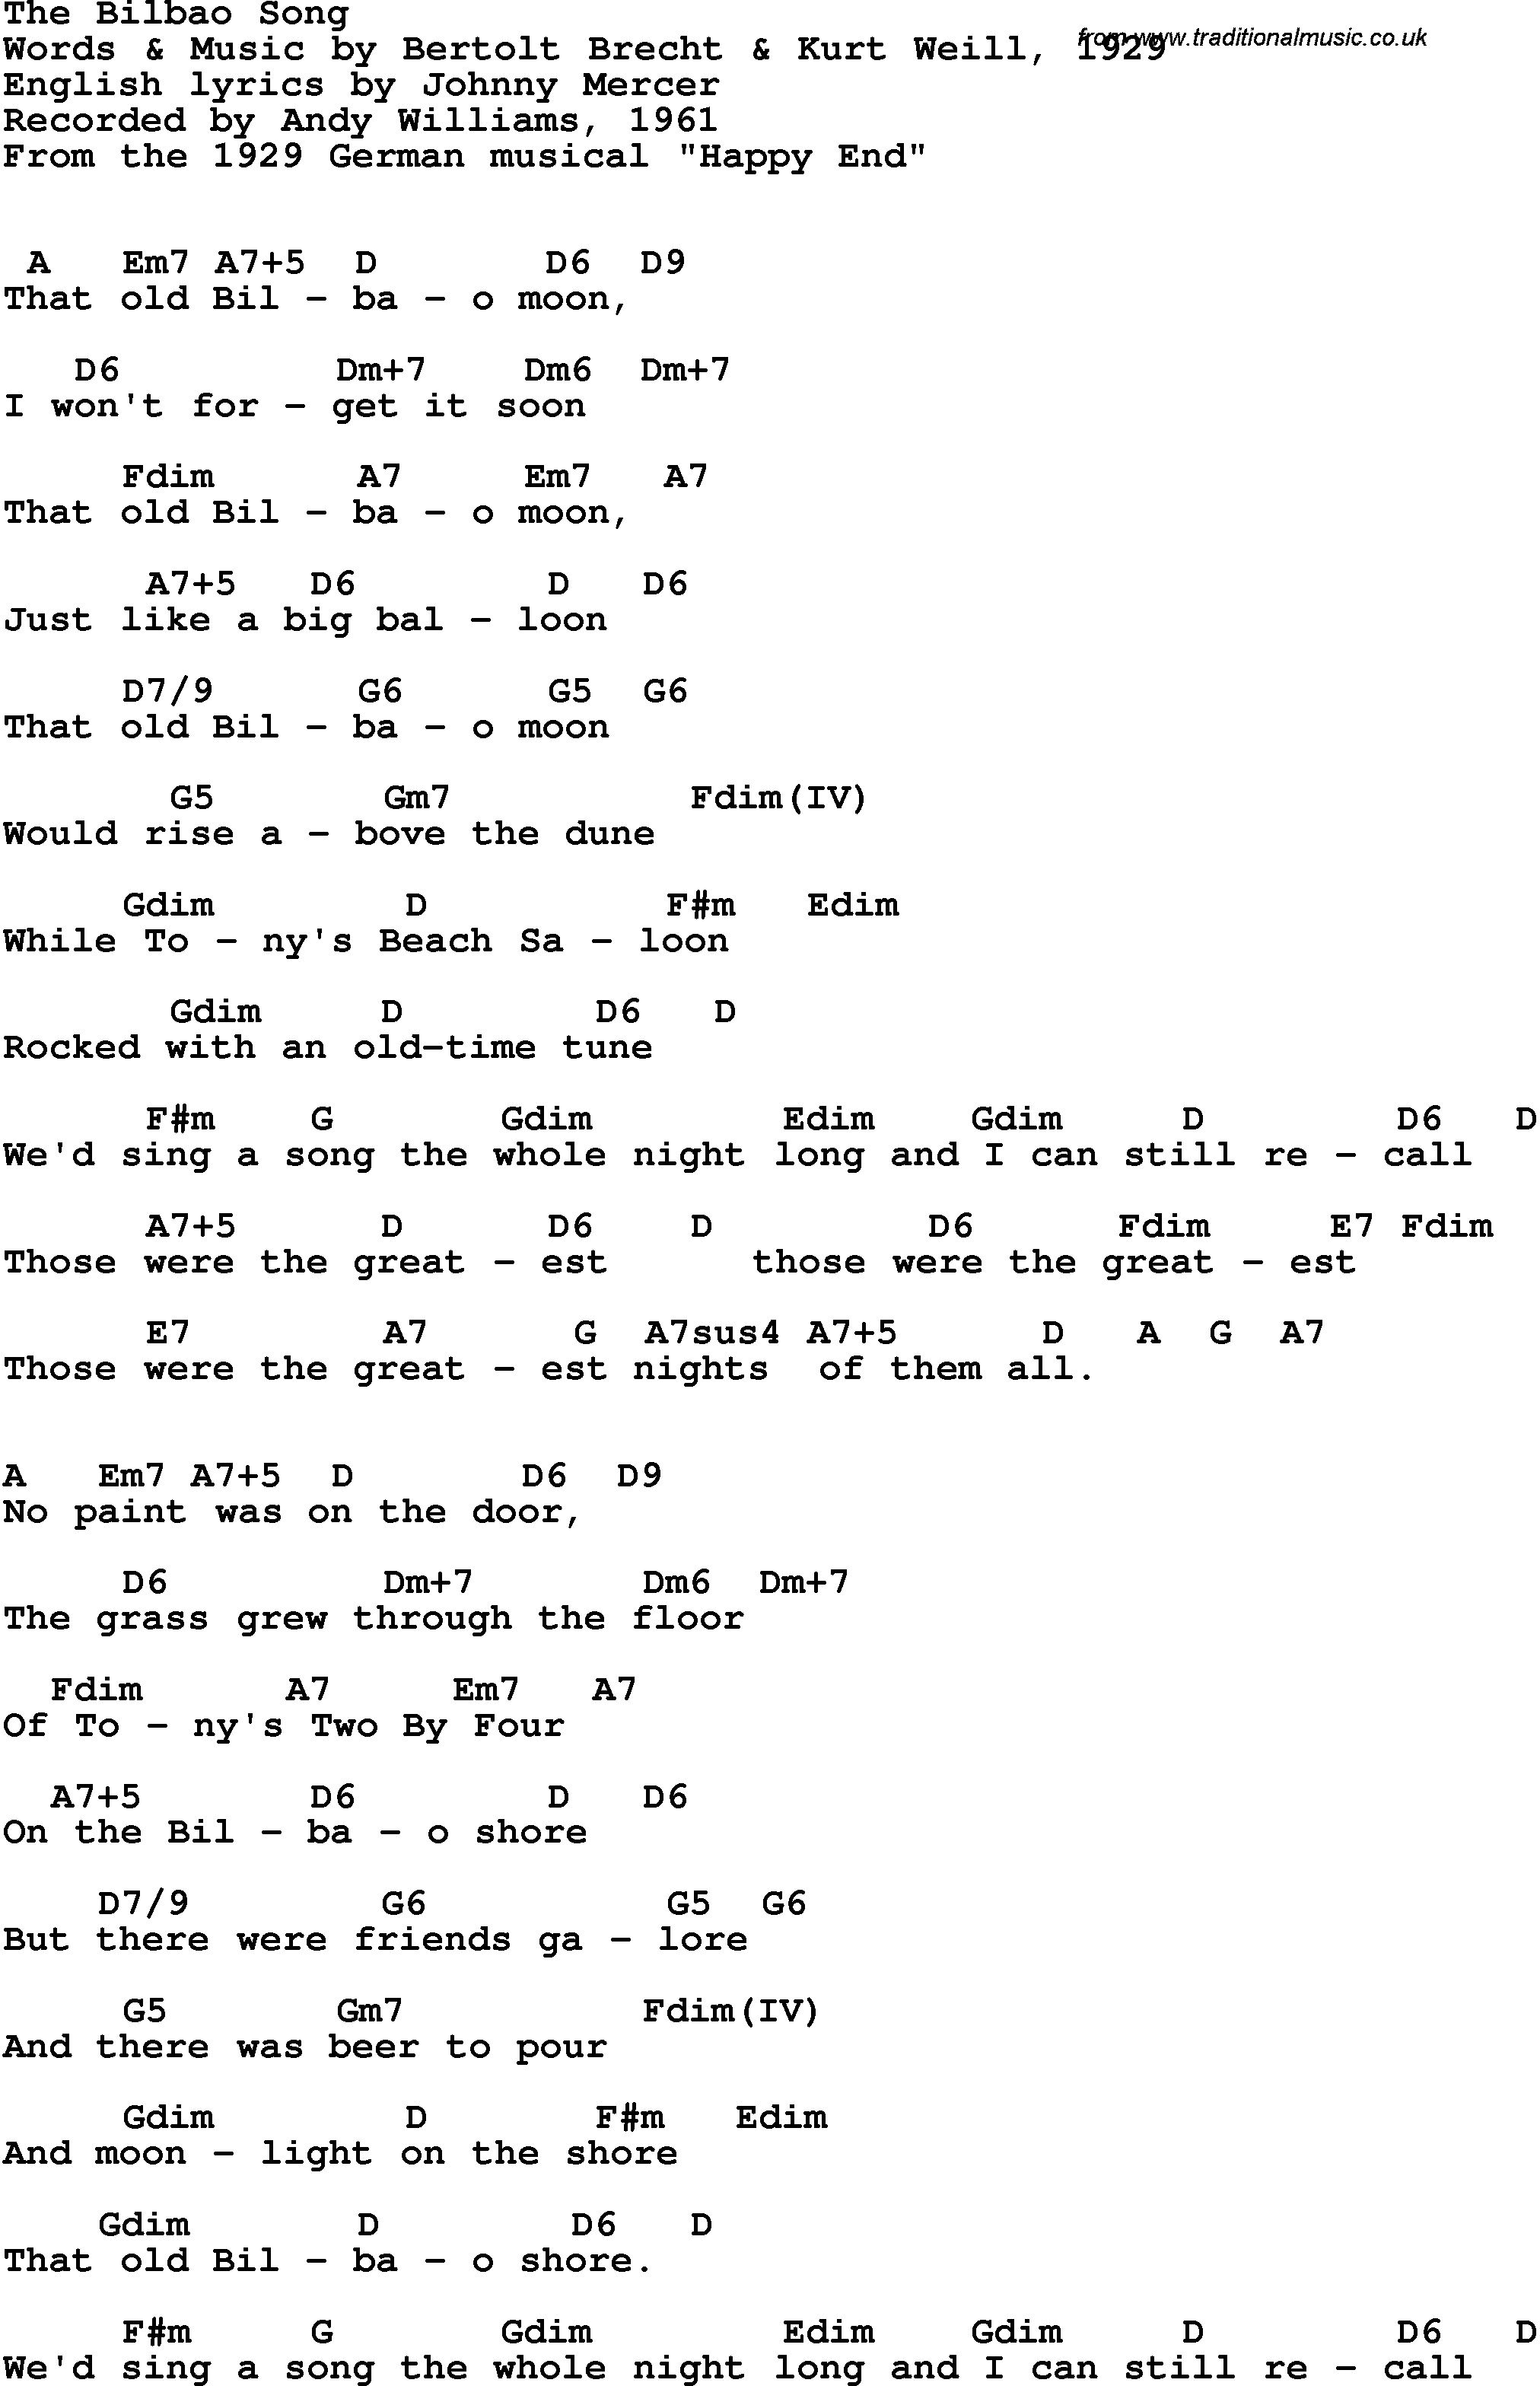 Song Lyrics with guitar chords for Bilbao Song, The - Andy Williams, 1961